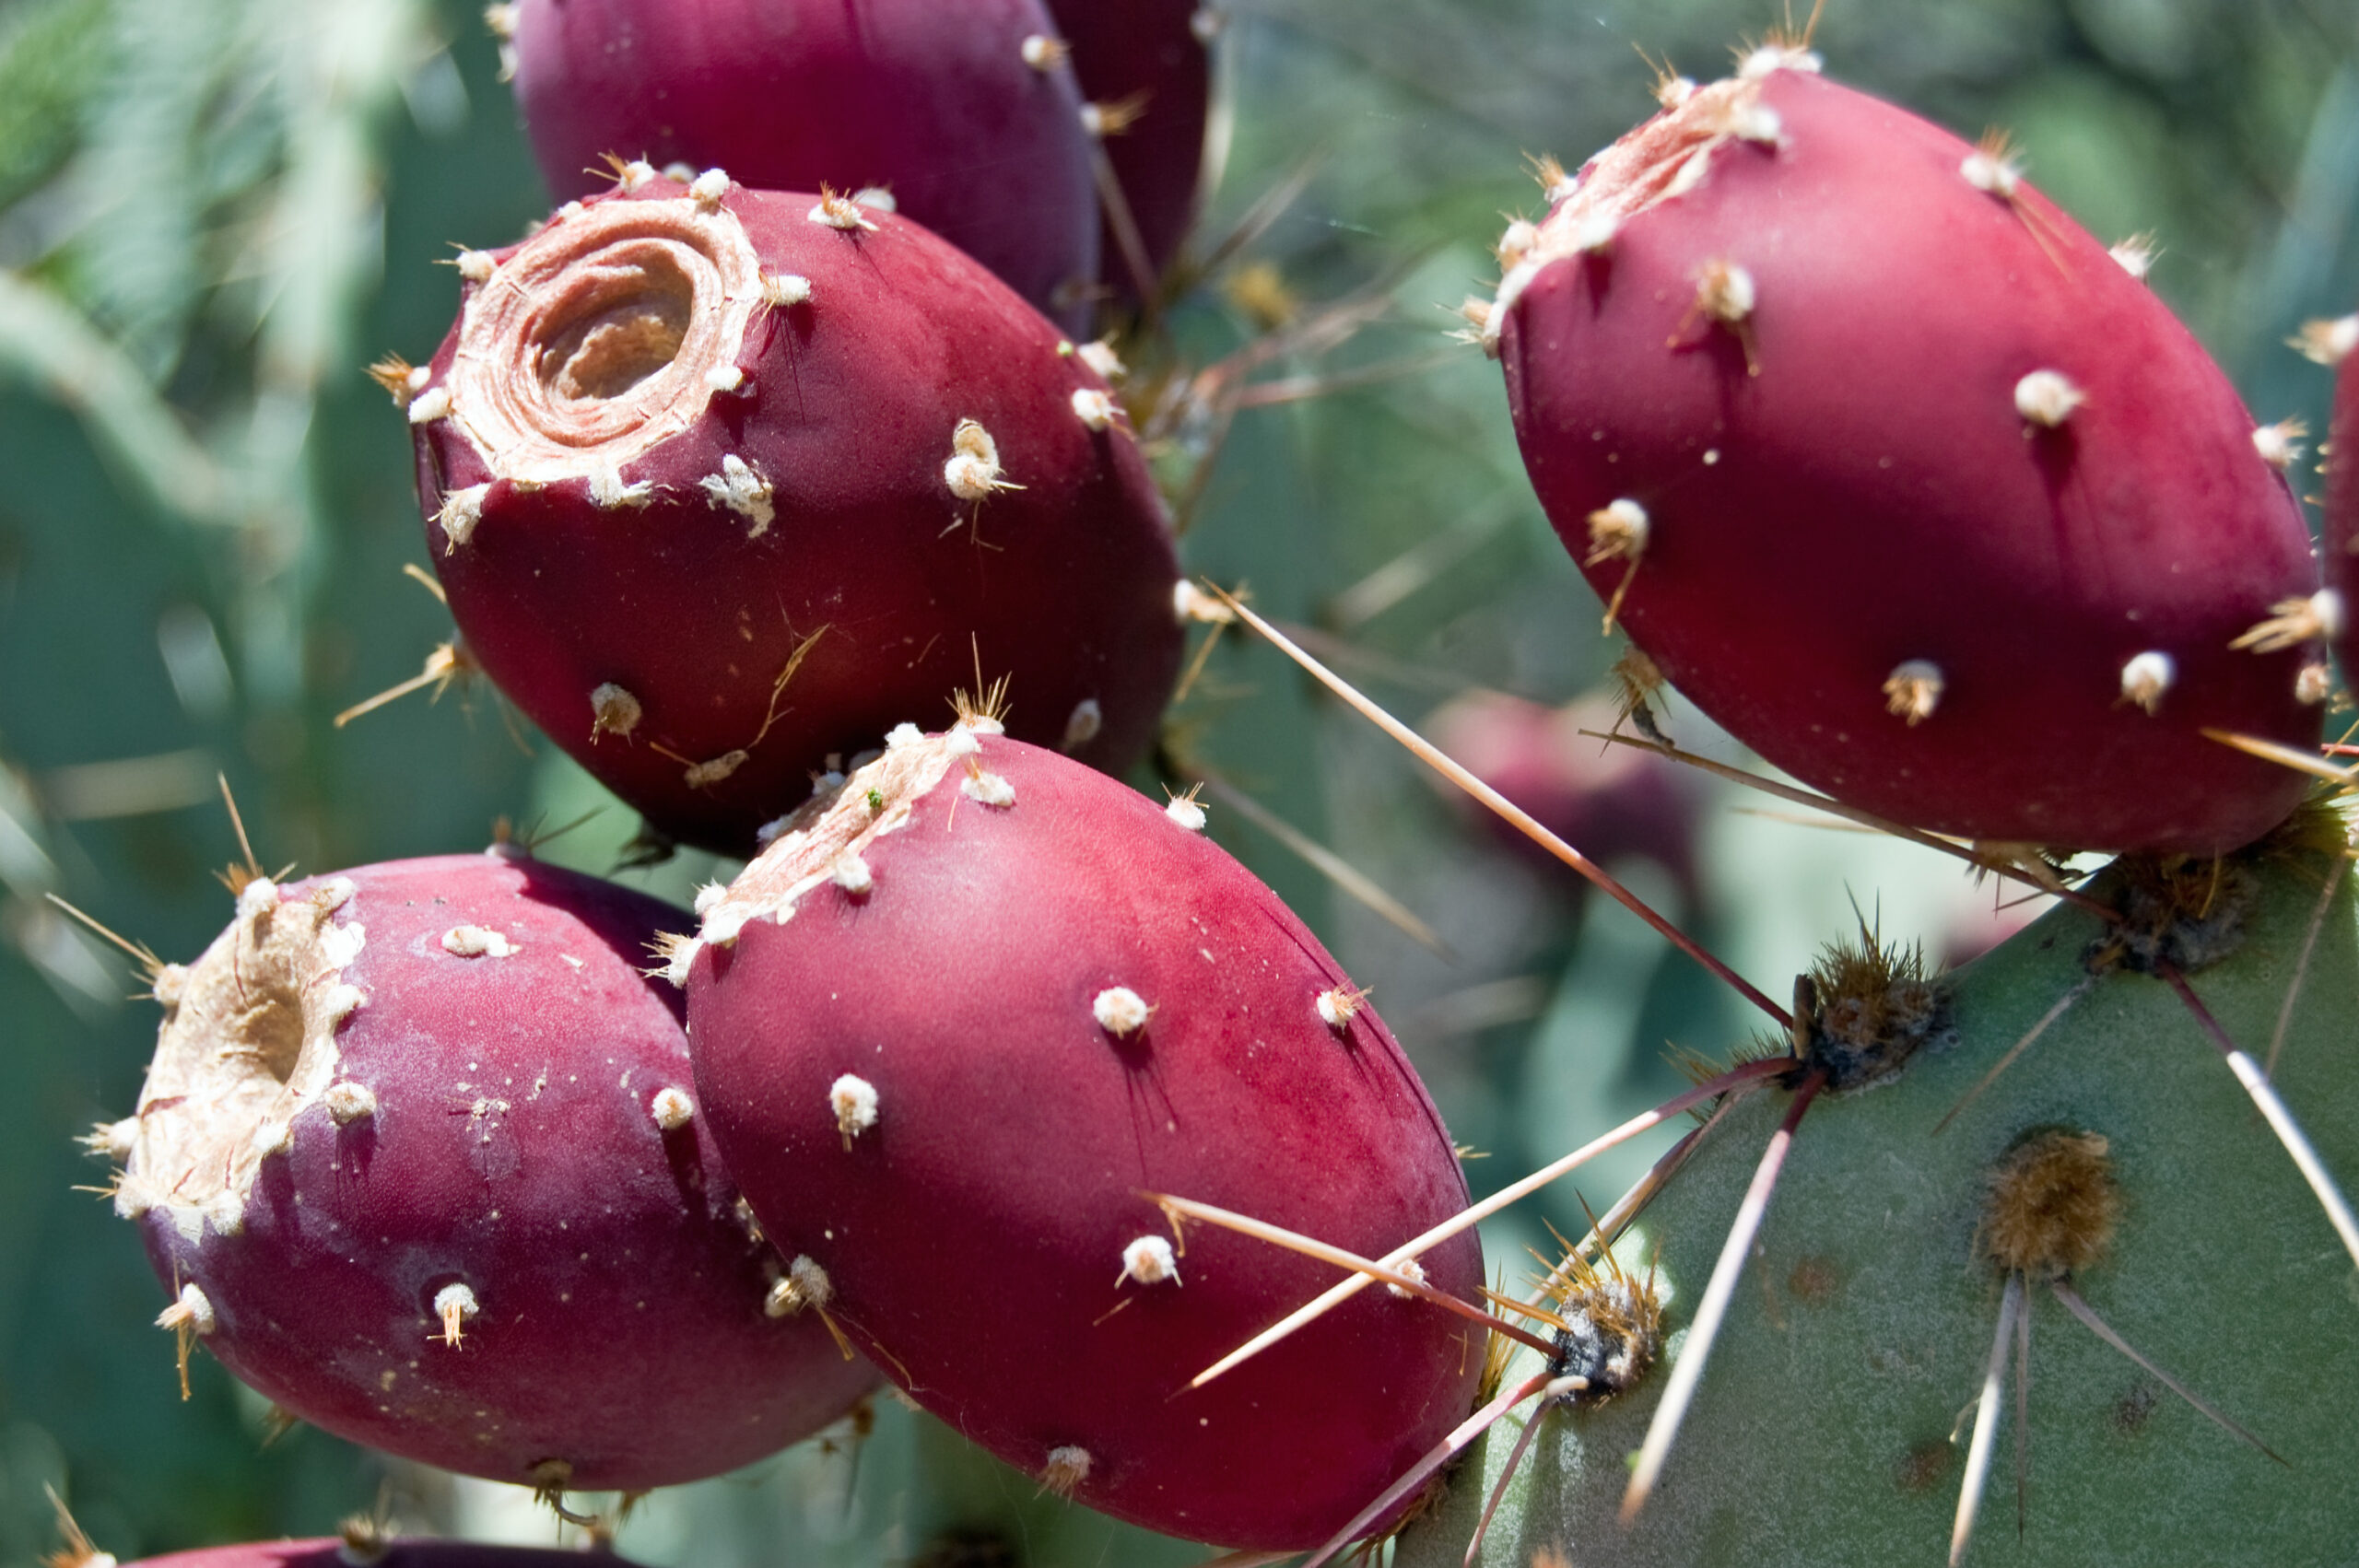 "Cactus Pear: A Prickly Marvel for a Healthier Life"